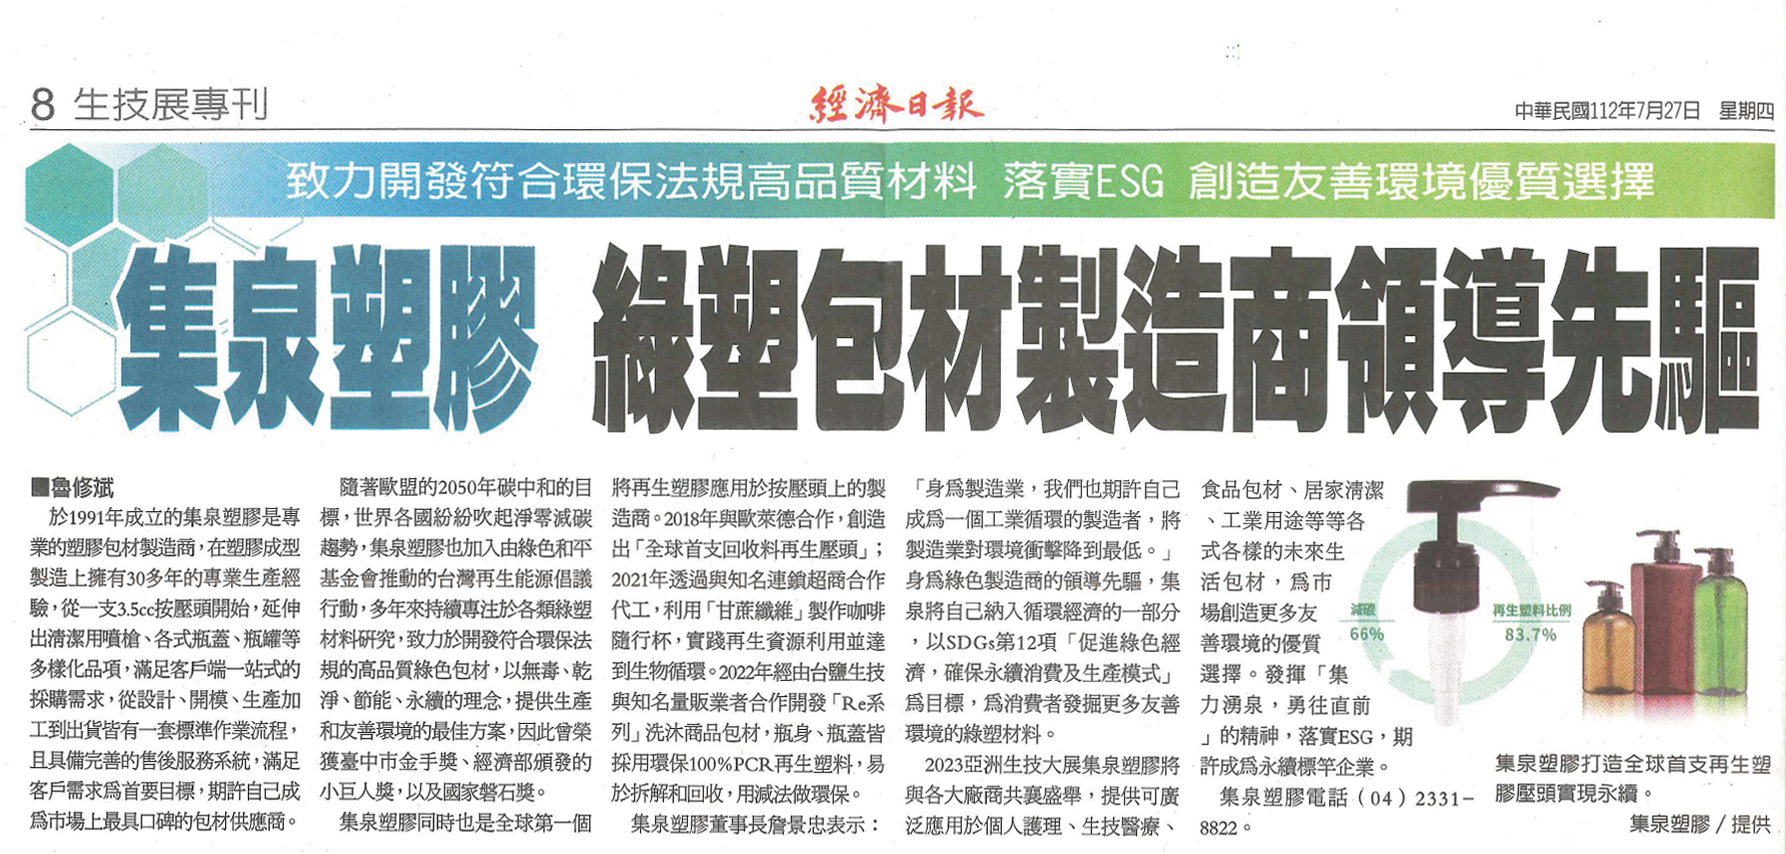 【Economic Daily News】Living Fountain - Leading Eco-Friendly Plastic Packaging Company